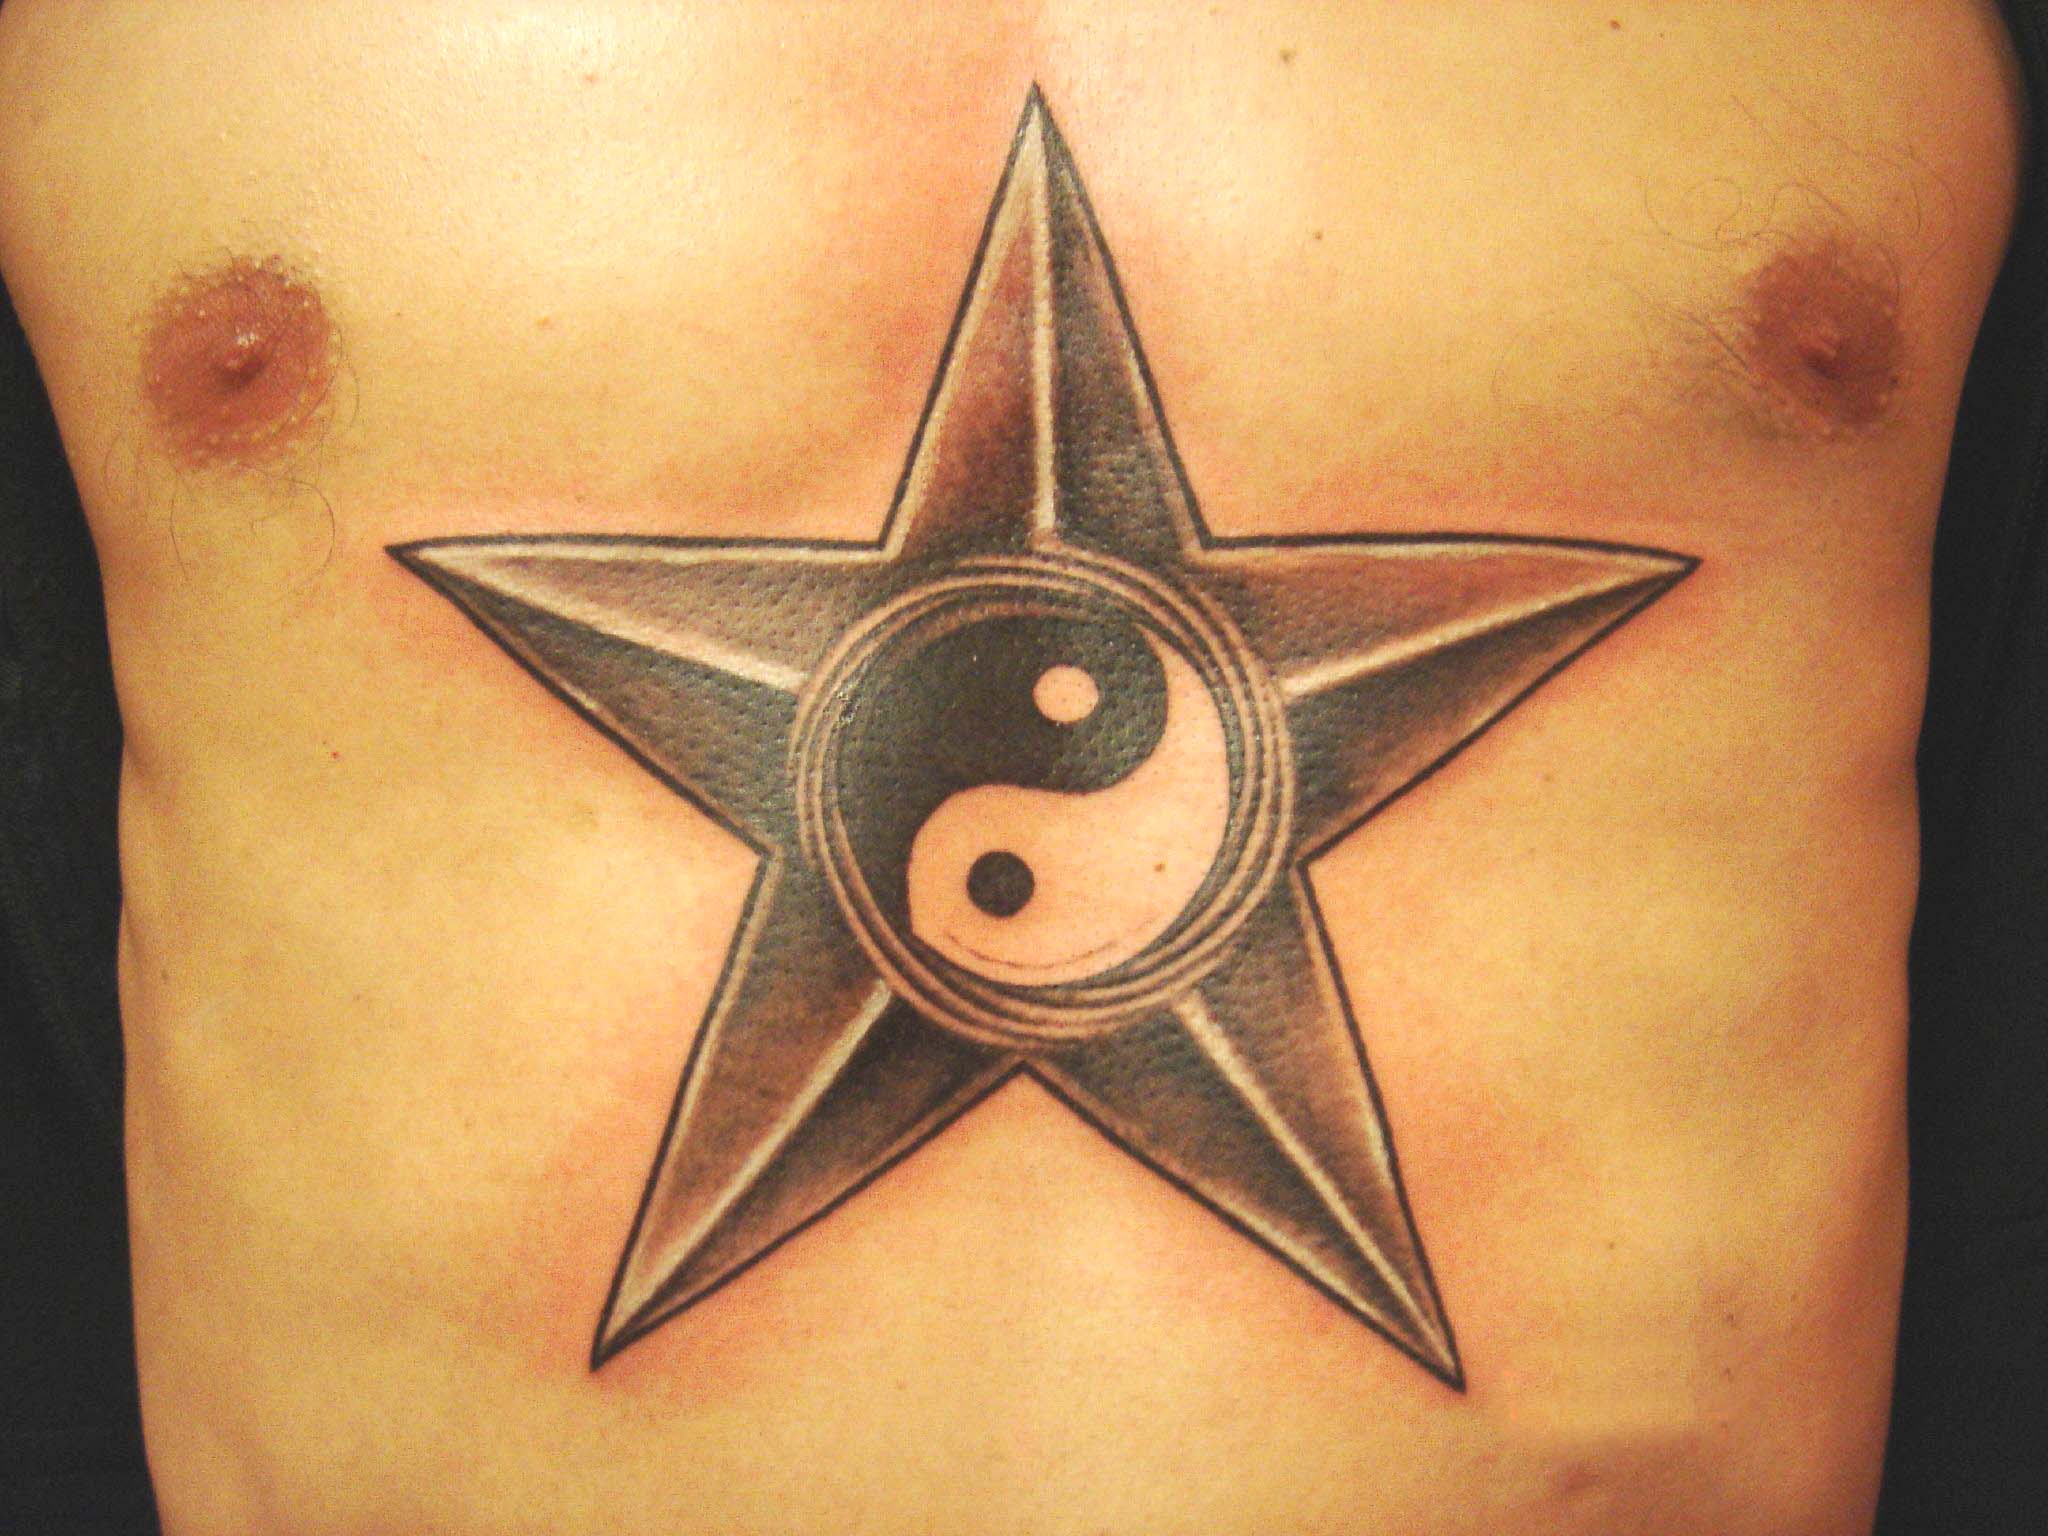 nautical star tattoos meaning and symbolism